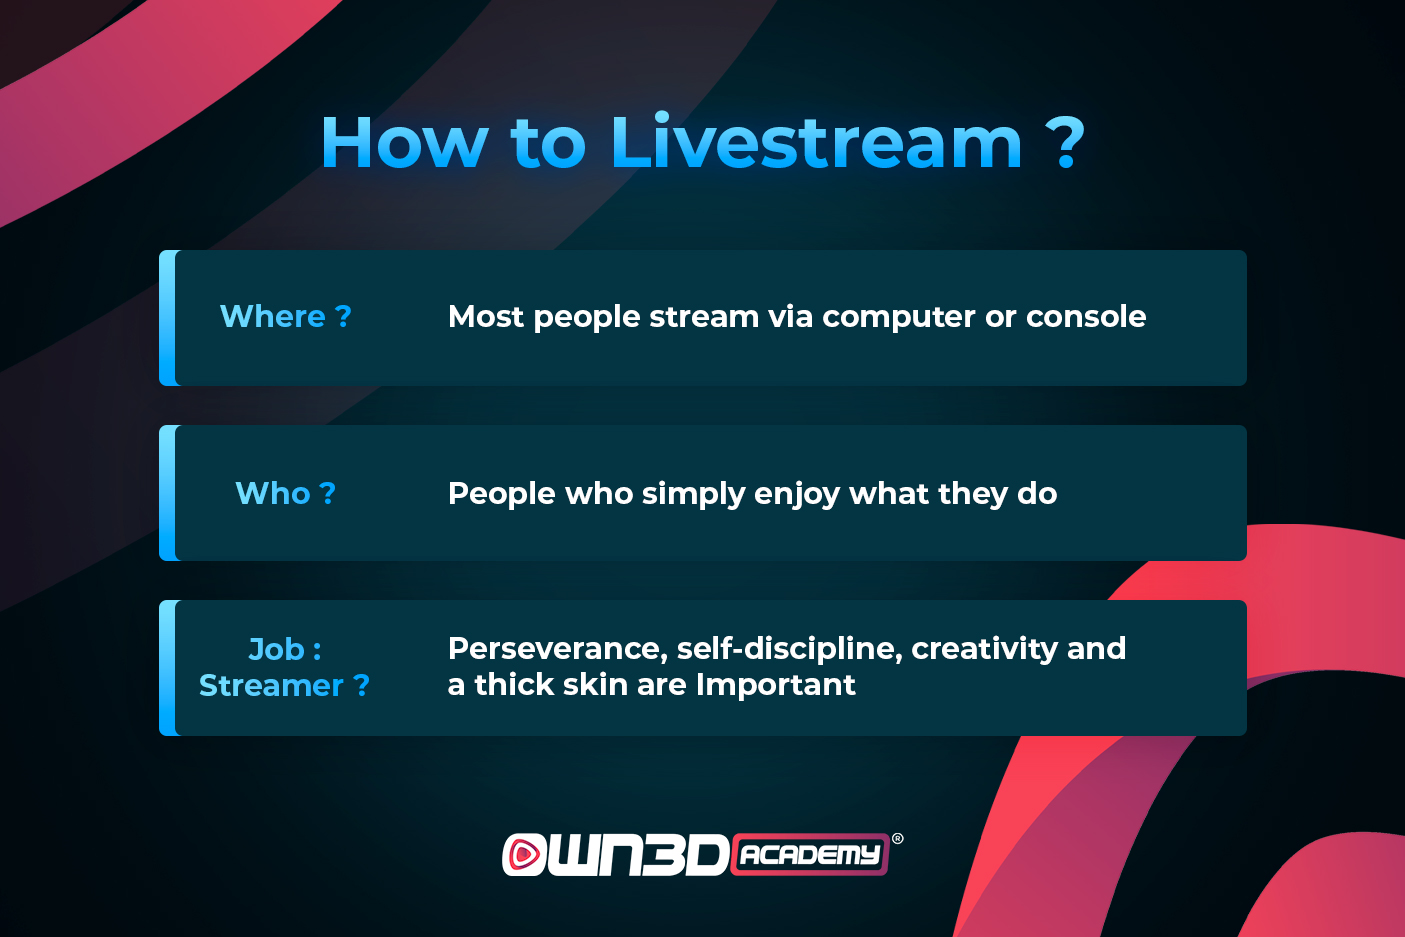 EN_General_What-is-livestreaming_how-to-livestream.jpg